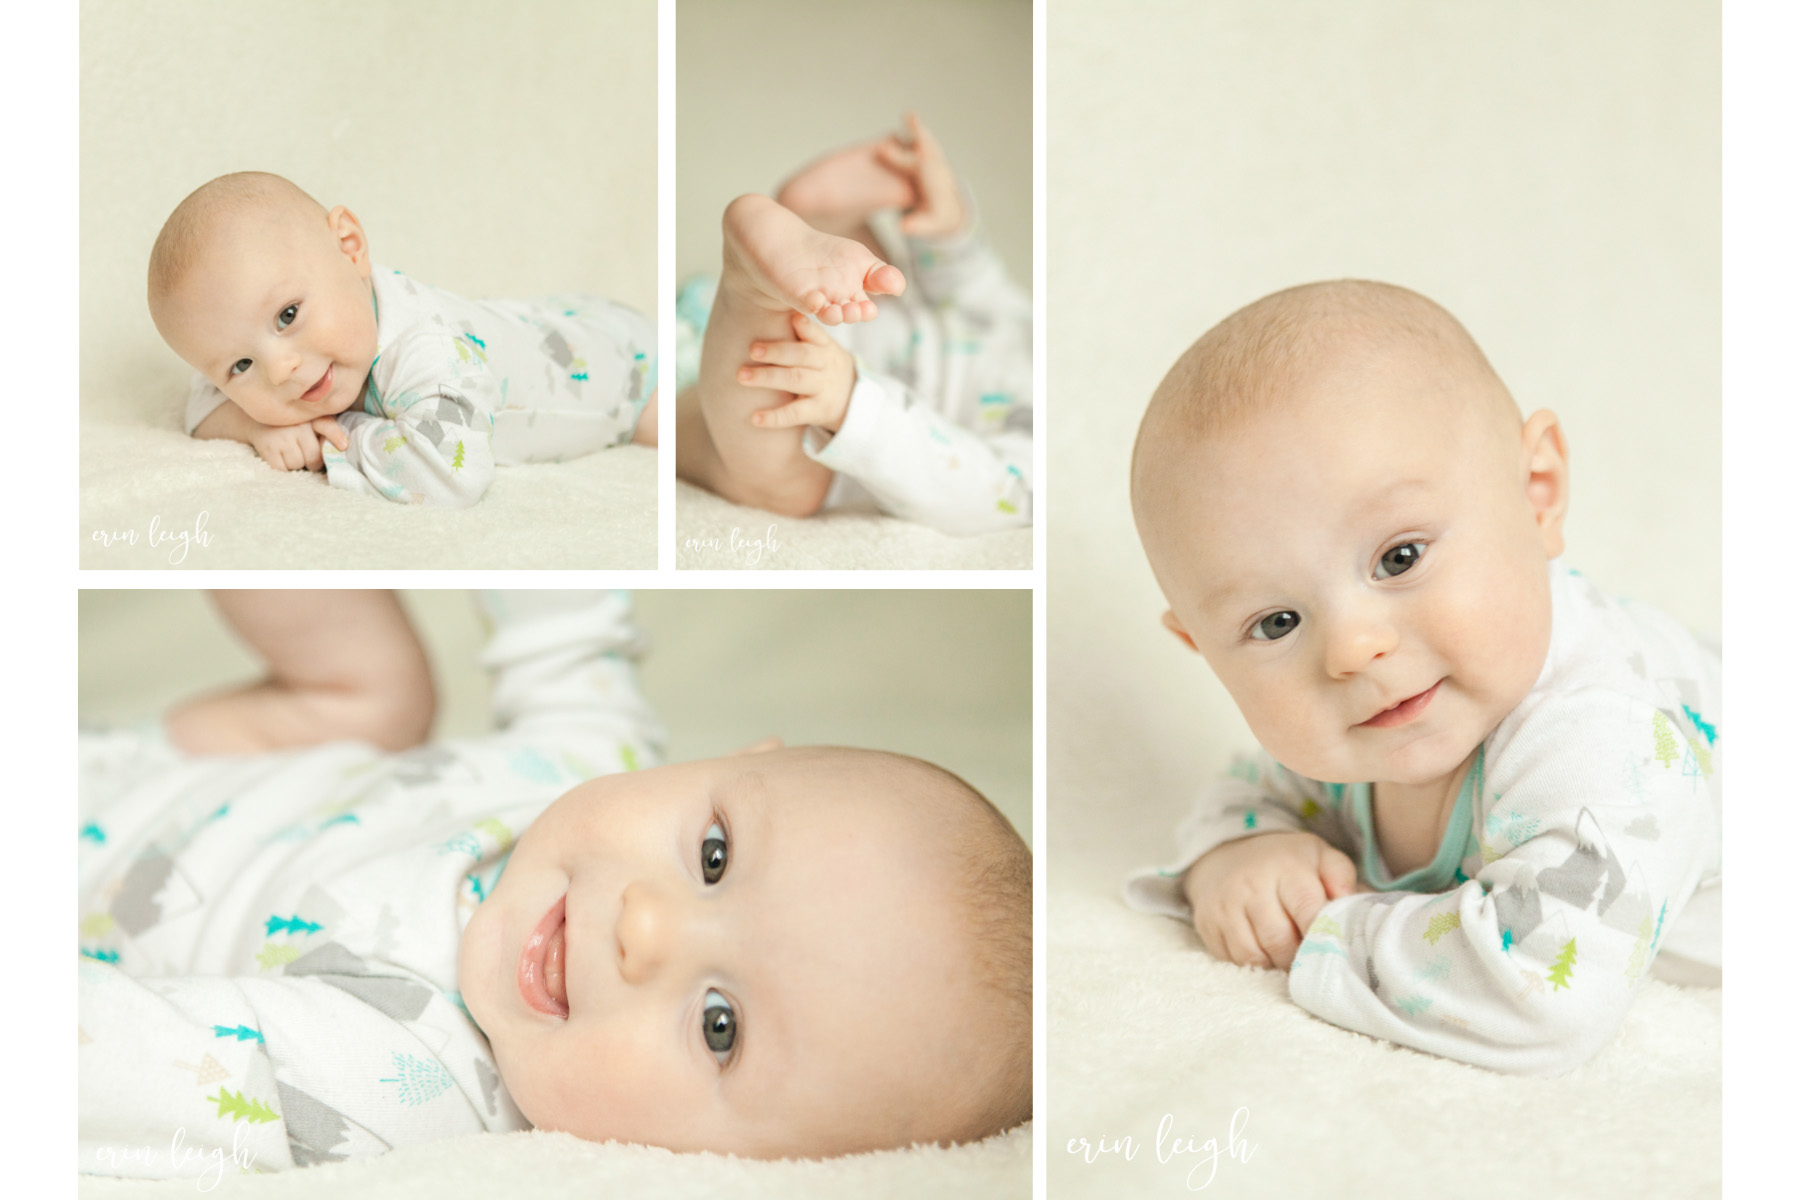 click to view Graysons 4 month photos